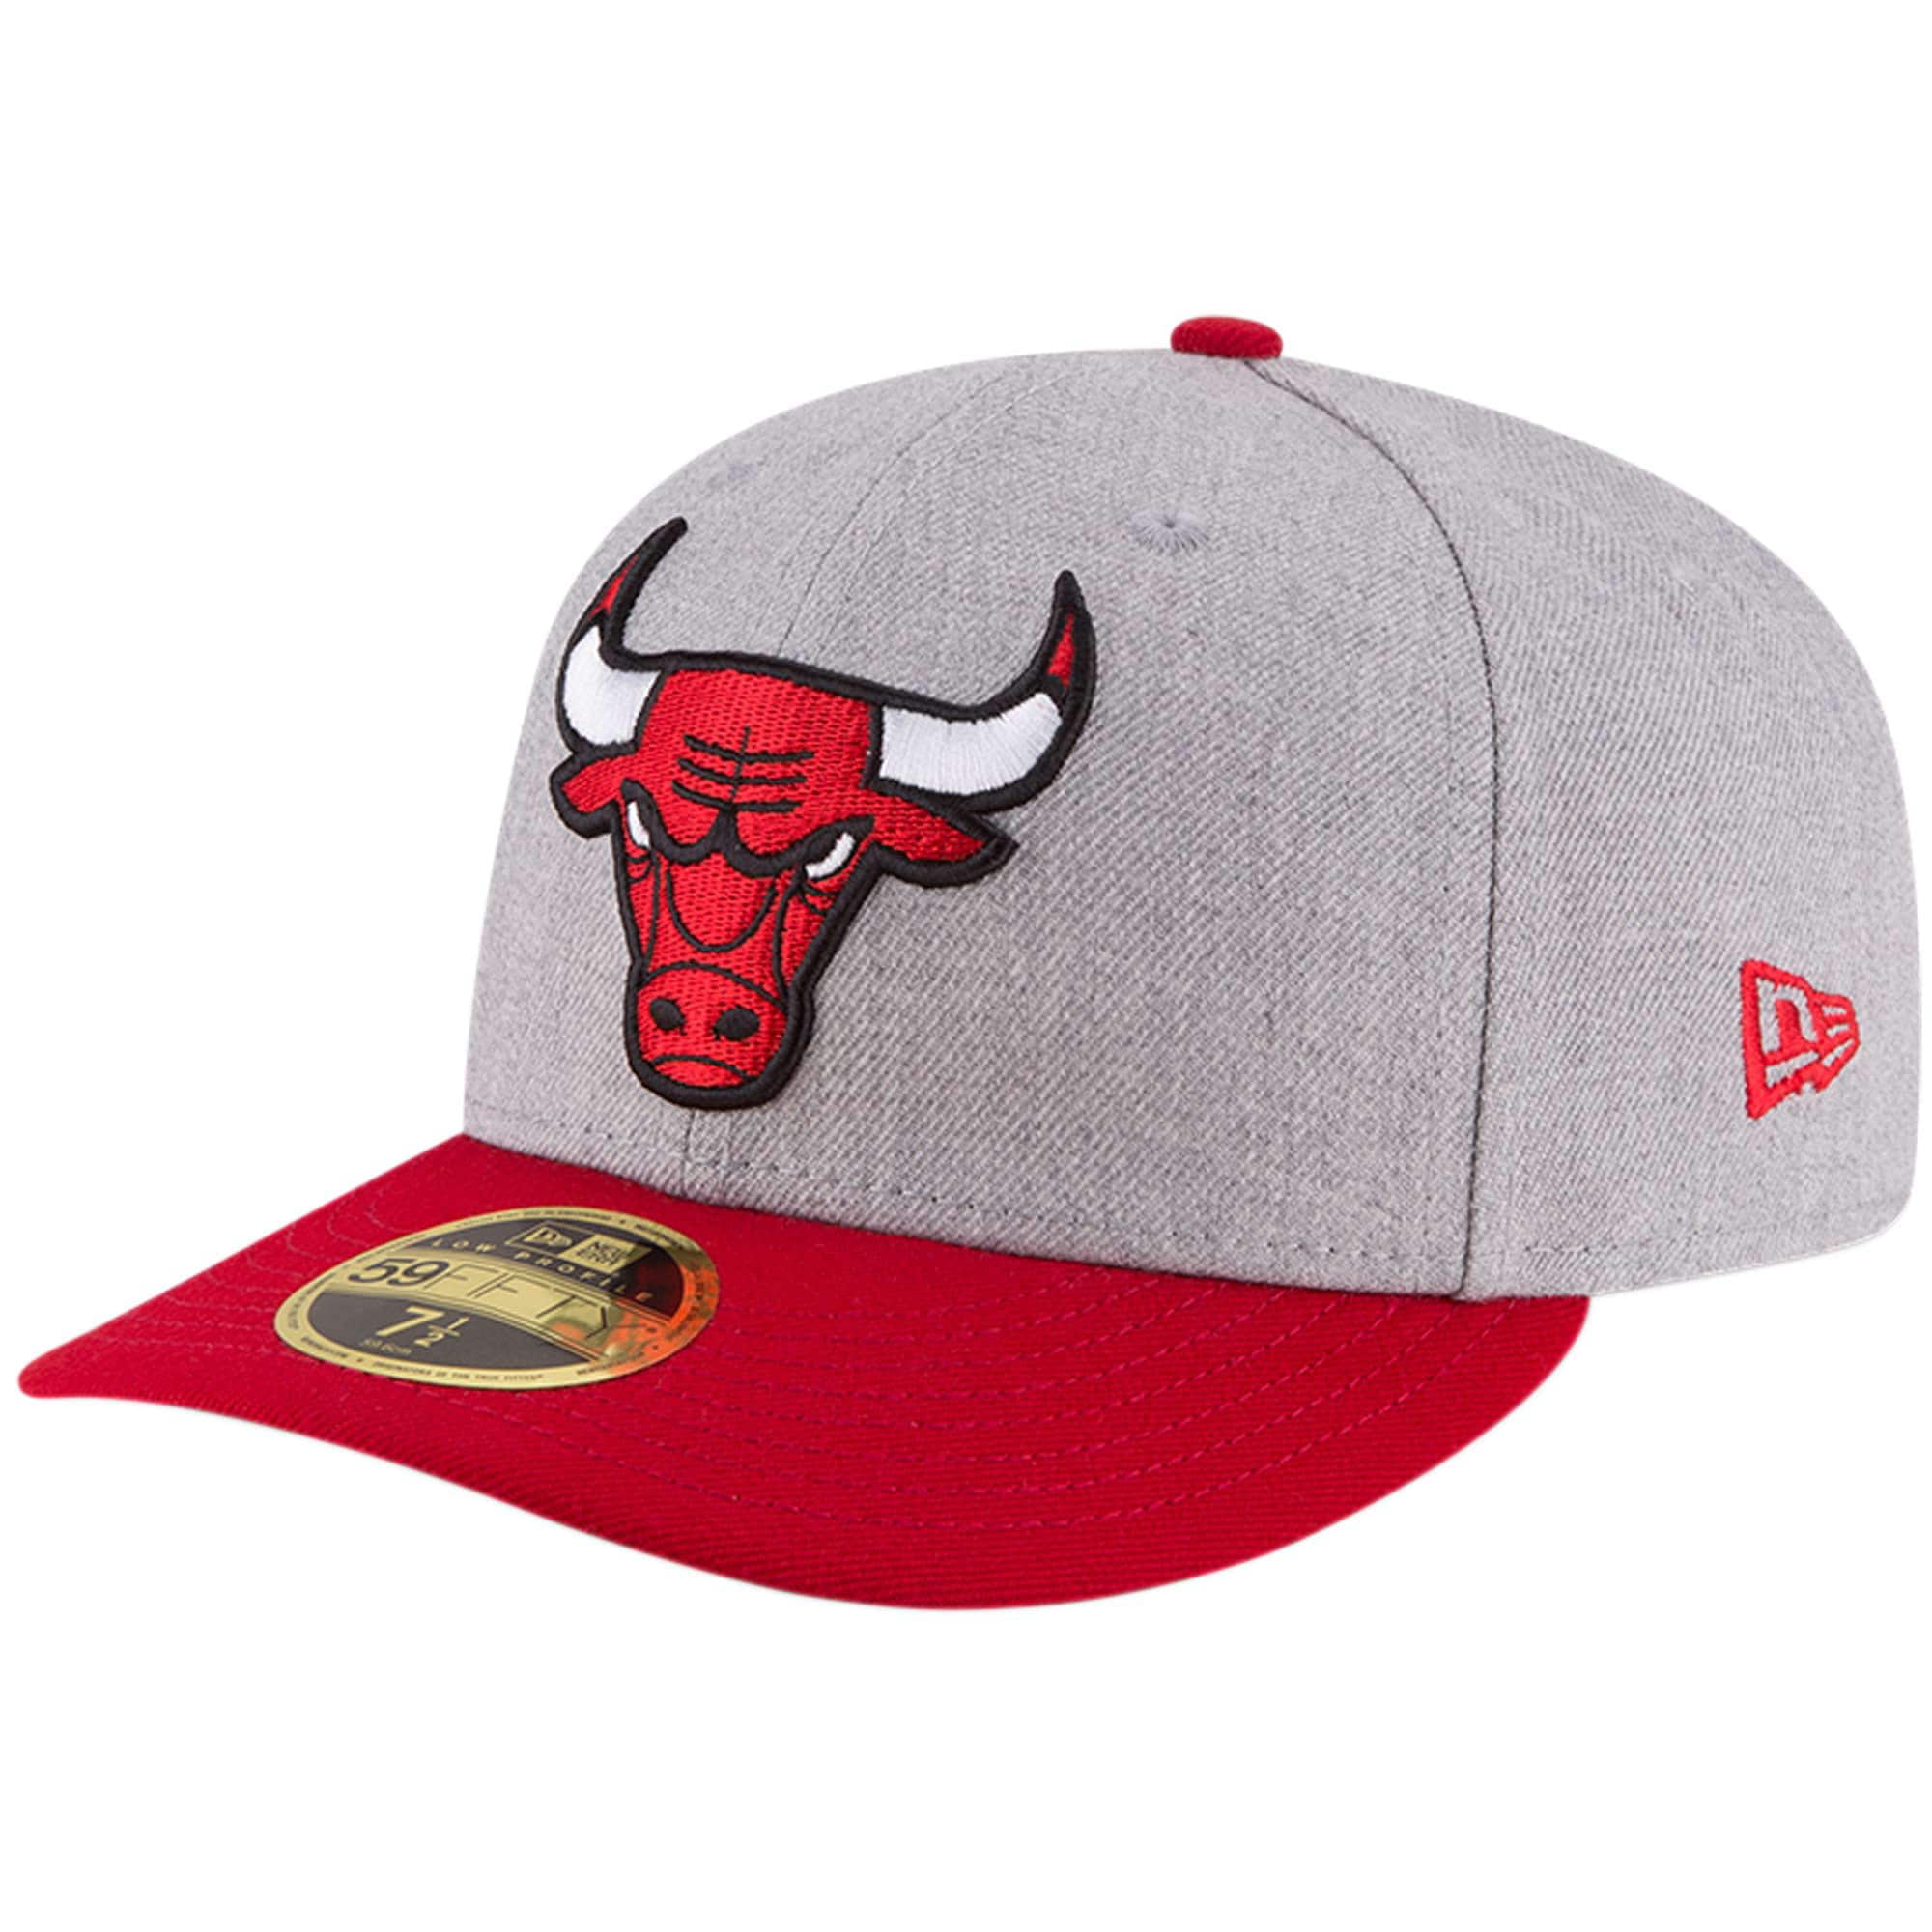 Mitchell & Ness Cotton stretch fit Cap New Chicago Bulls Kings Heat 